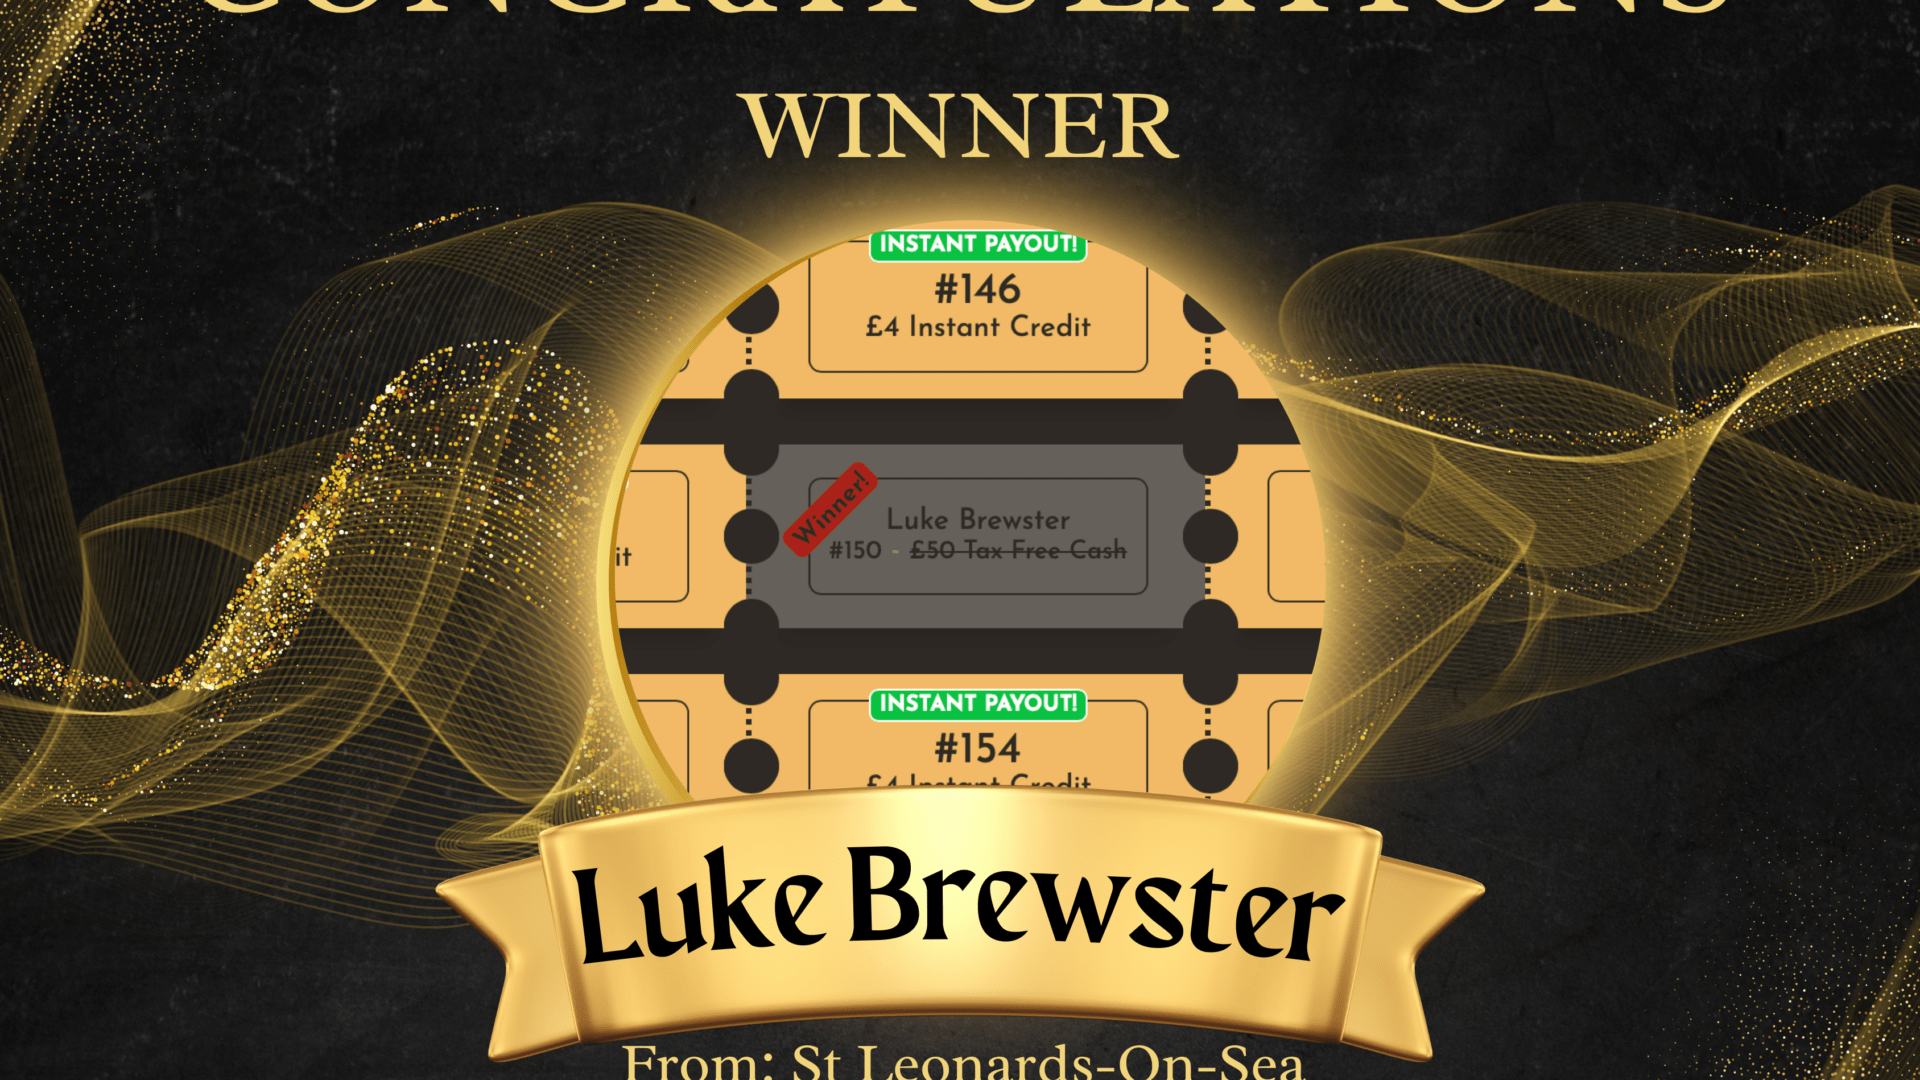 Congratulations to Luke Brewster from Bexhill, winner of our first-ever instant win prize of £50 cash!